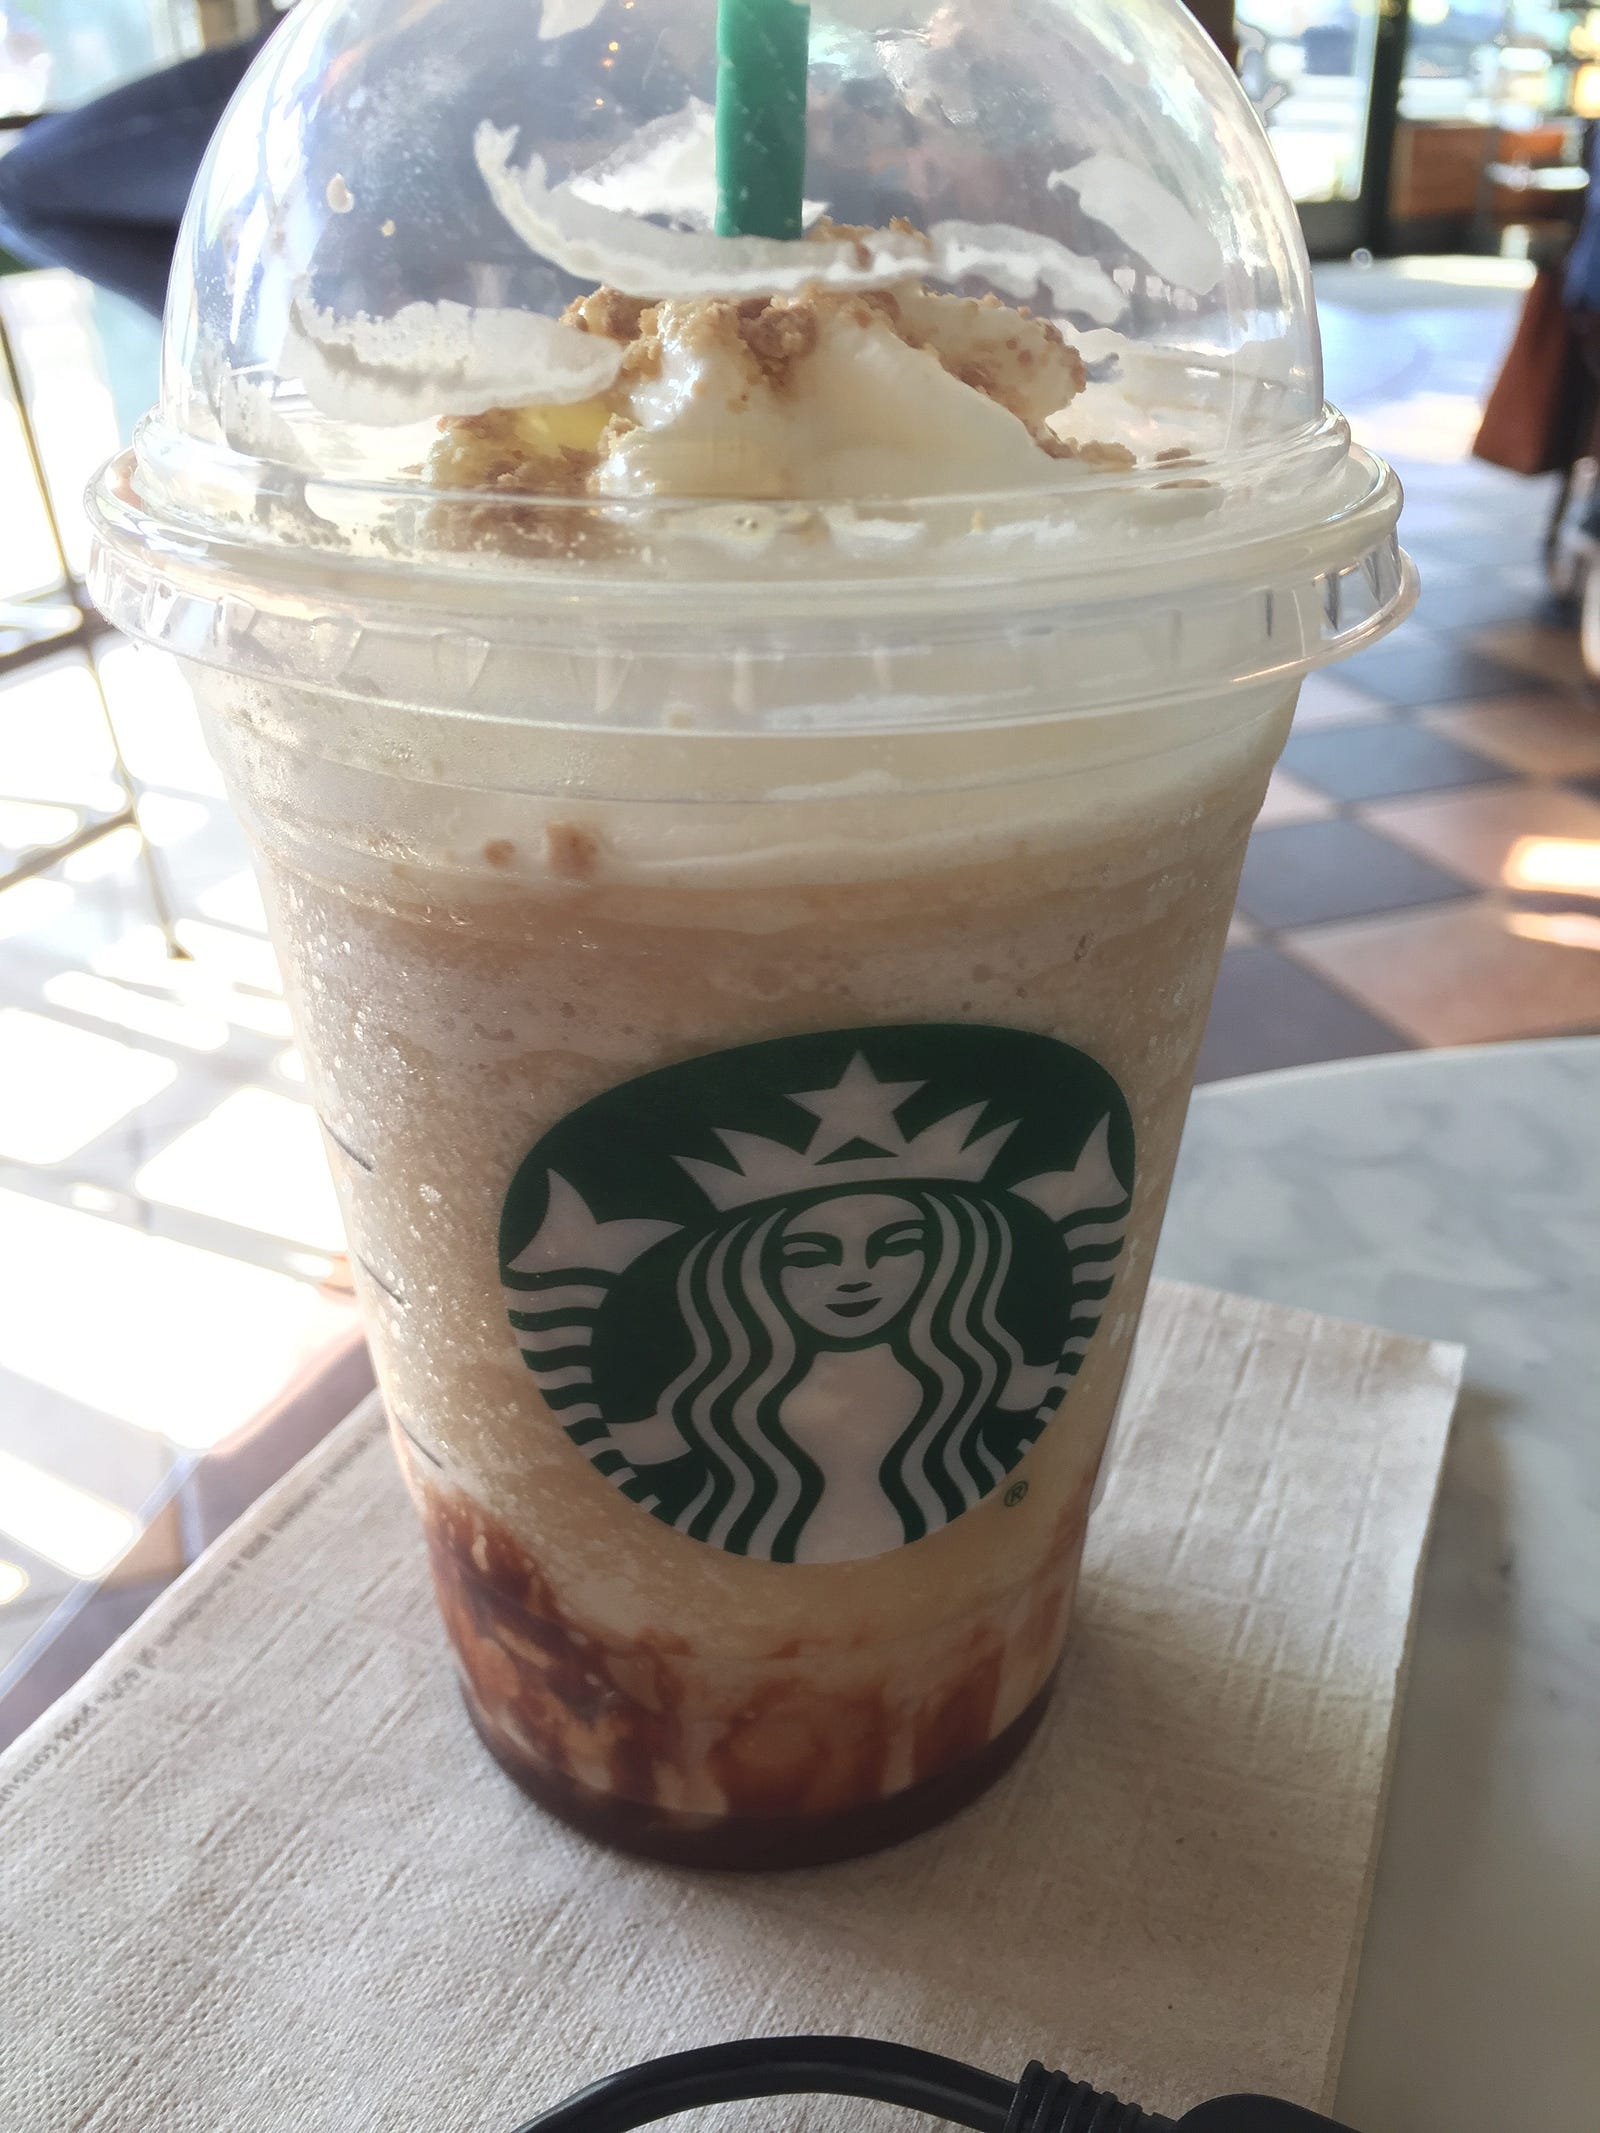 Starbucks S’mores Frappuccino Review A cup full of chocolate.